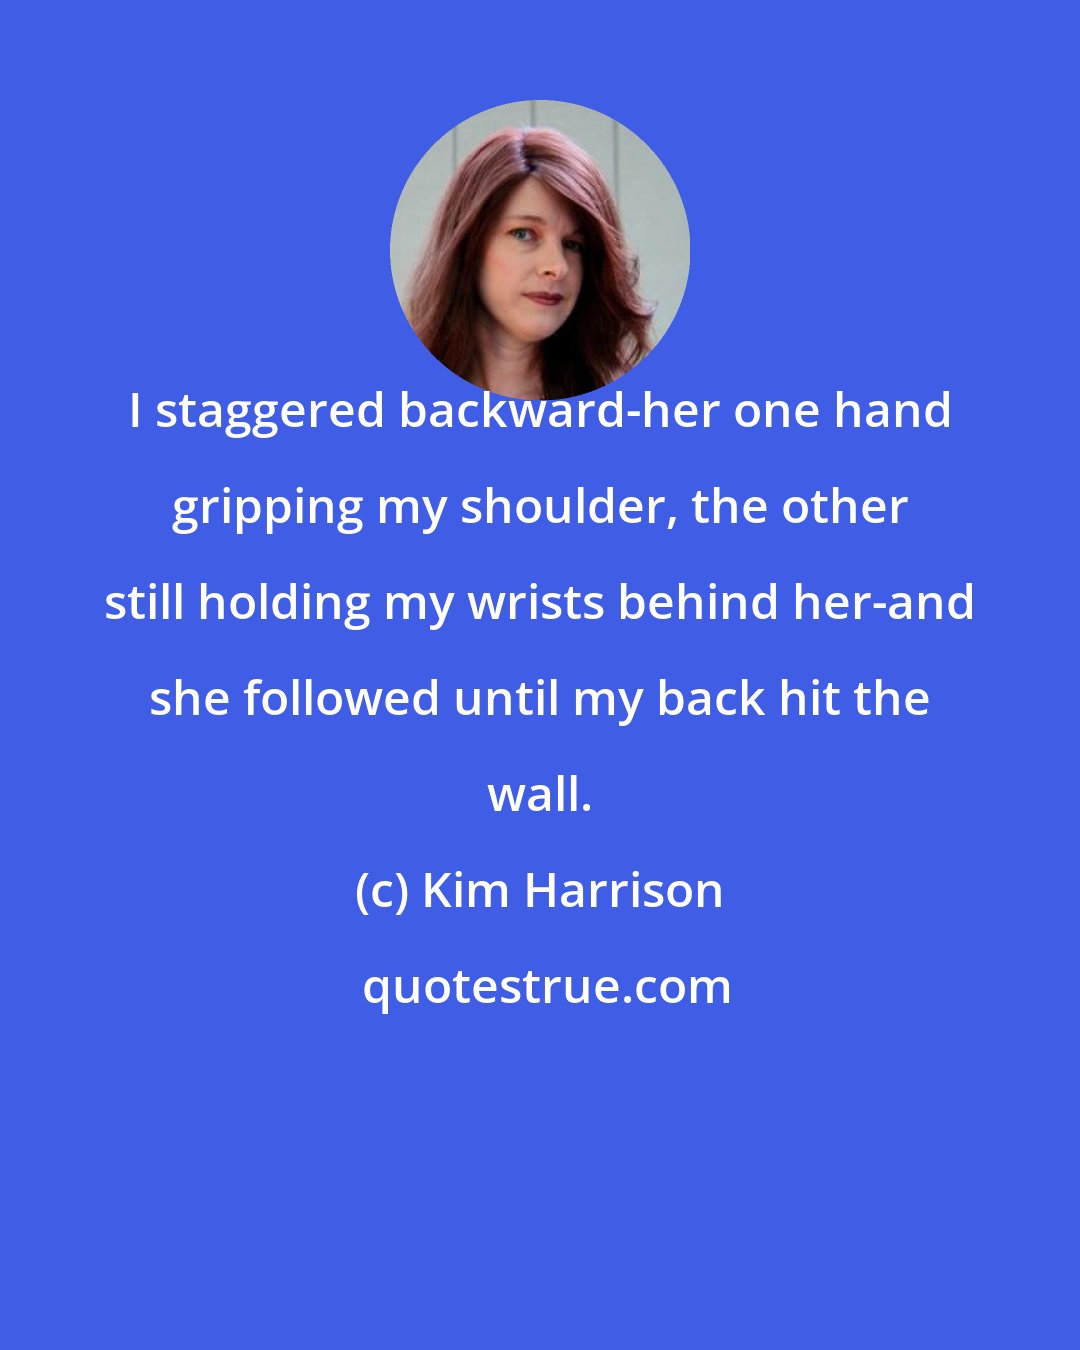 Kim Harrison: I staggered backward-her one hand gripping my shoulder, the other still holding my wrists behind her-and she followed until my back hit the wall.